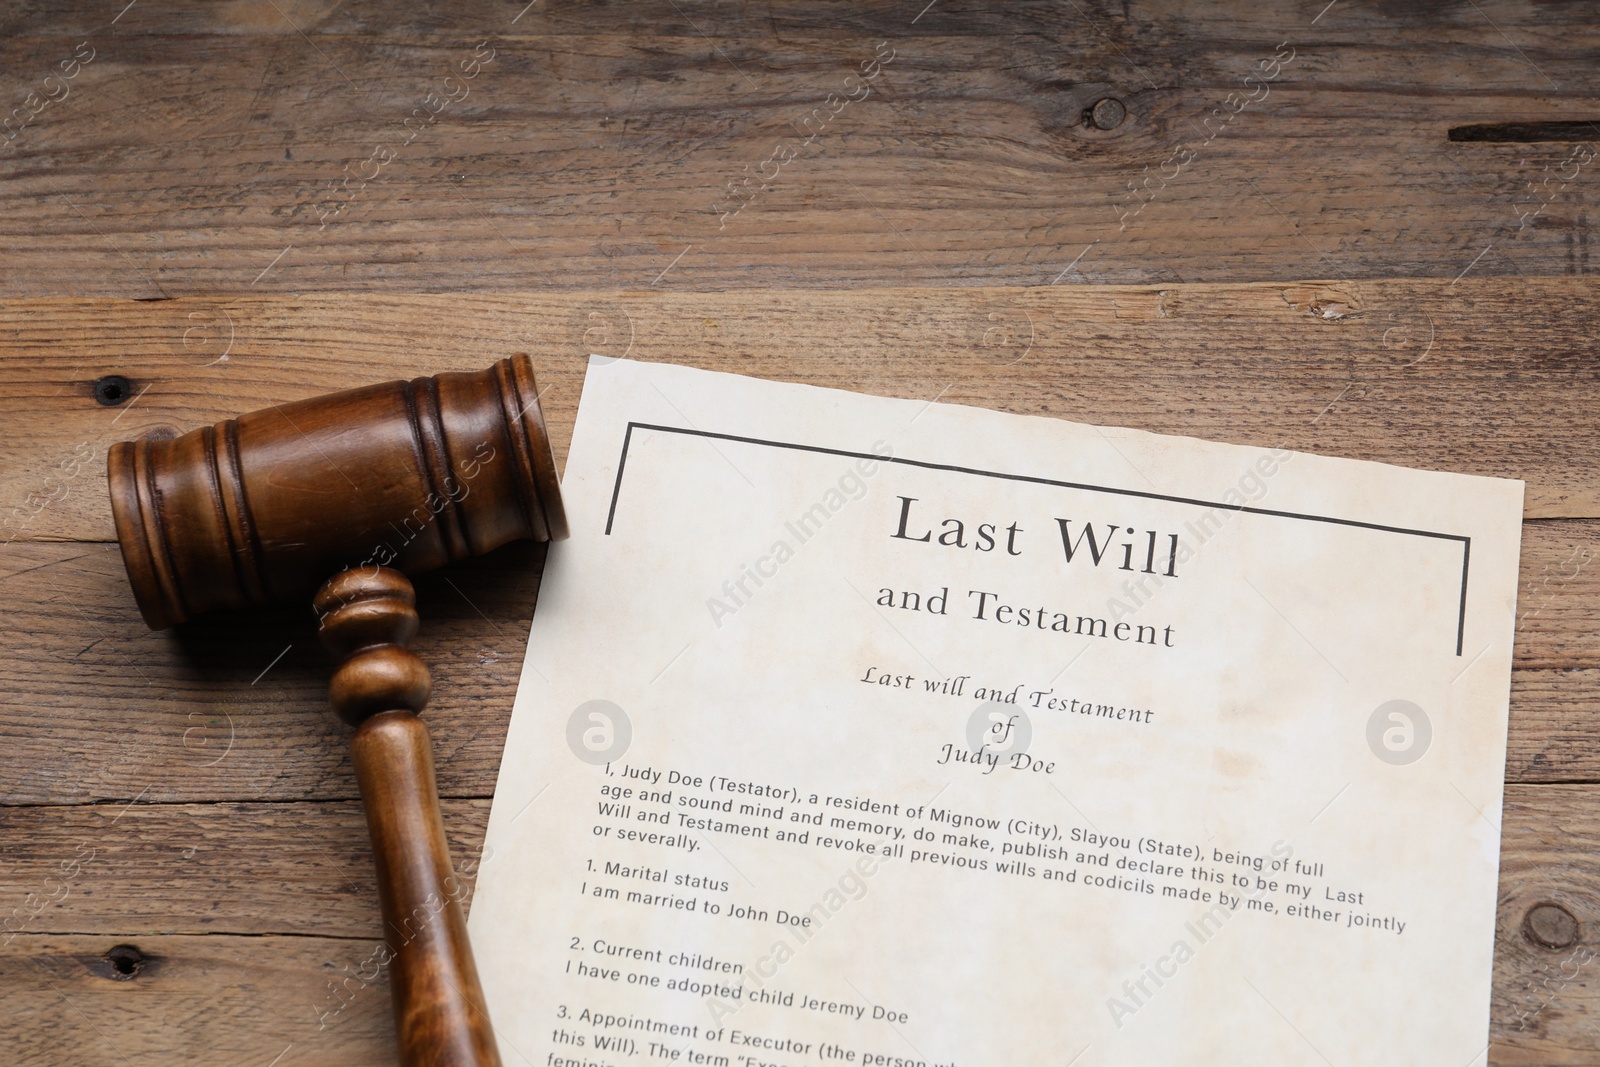 Photo of Last Will and Testament with gavel on wooden table, above view